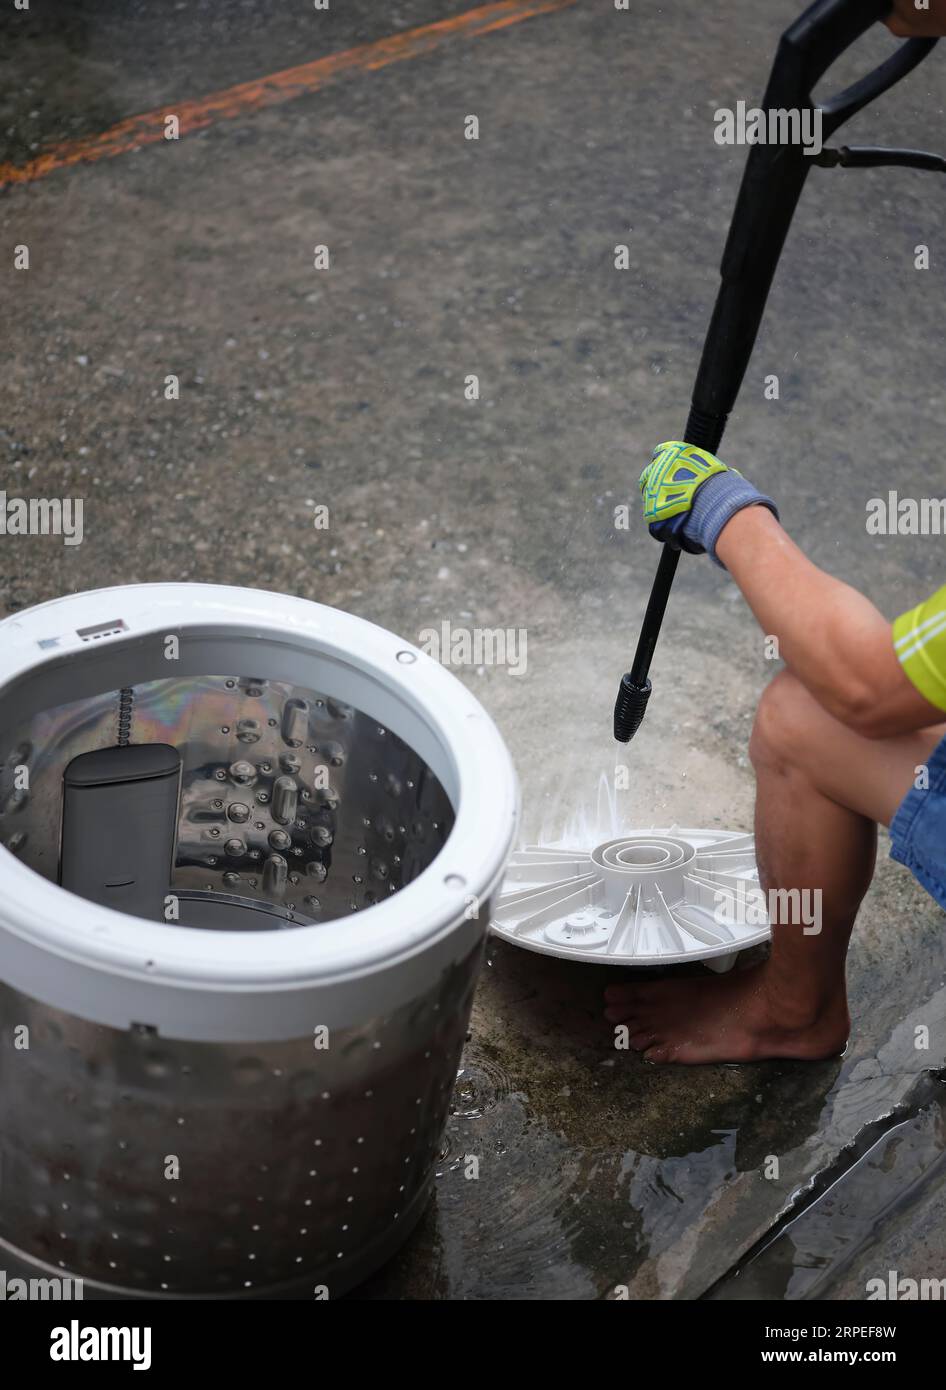 Hands of repairman using  Water sprayer machine after repairing or removing it to clean the drum,repair of household electrical appliances or cleaning Stock Photo